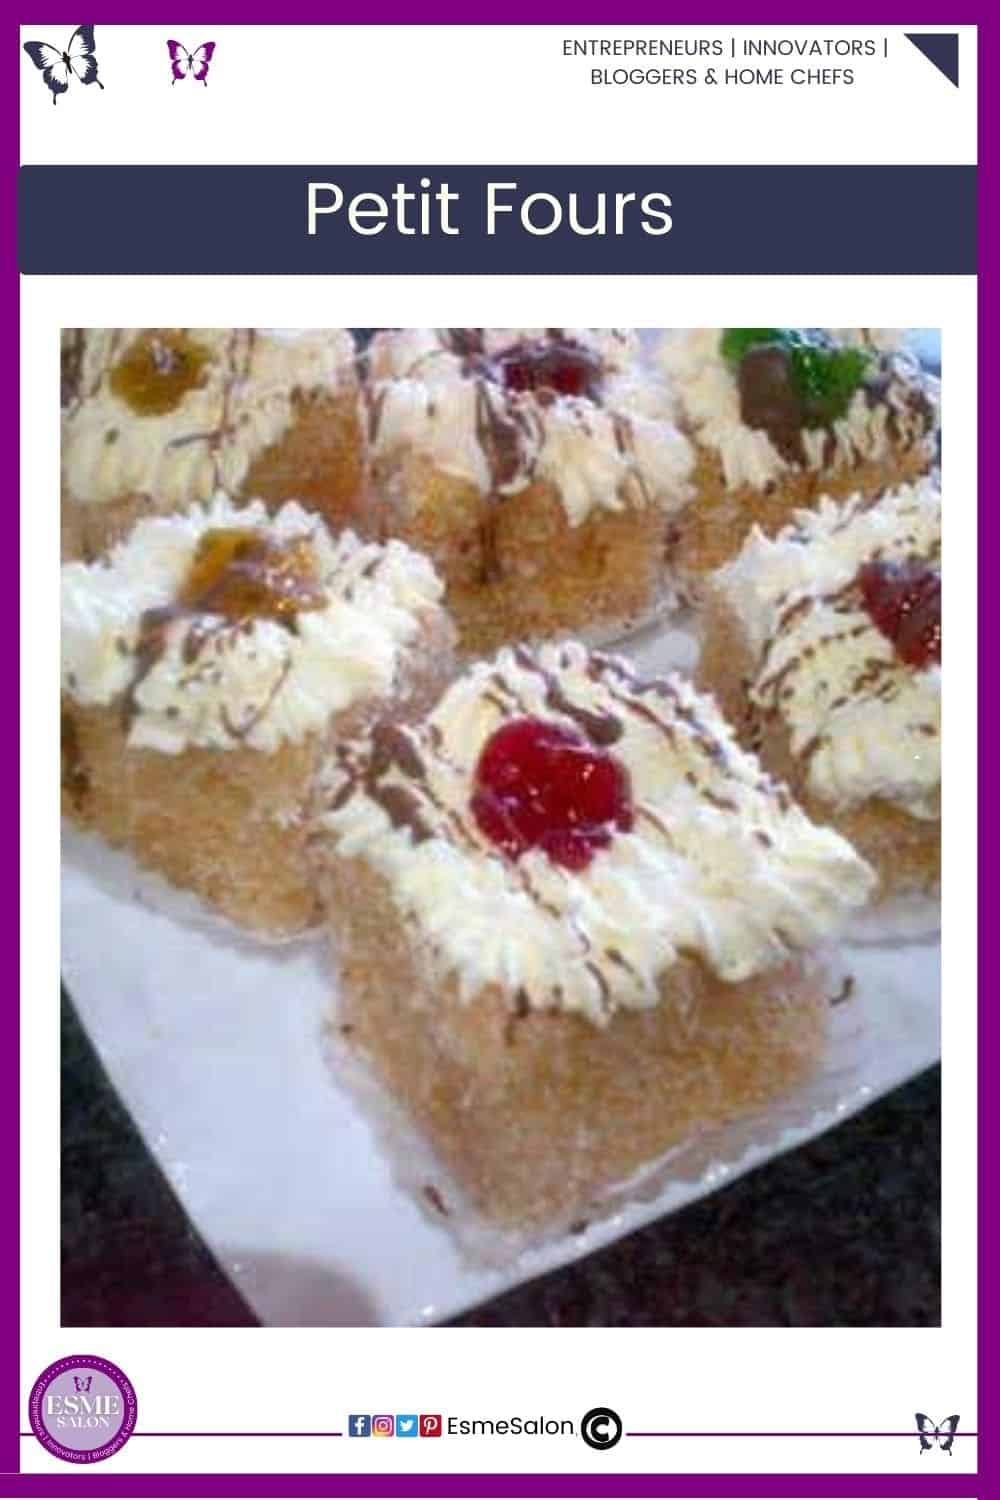 an image of white cubes of cake rolled in coconut and topped with cream and fruit as decoration and drizzled with chocolate